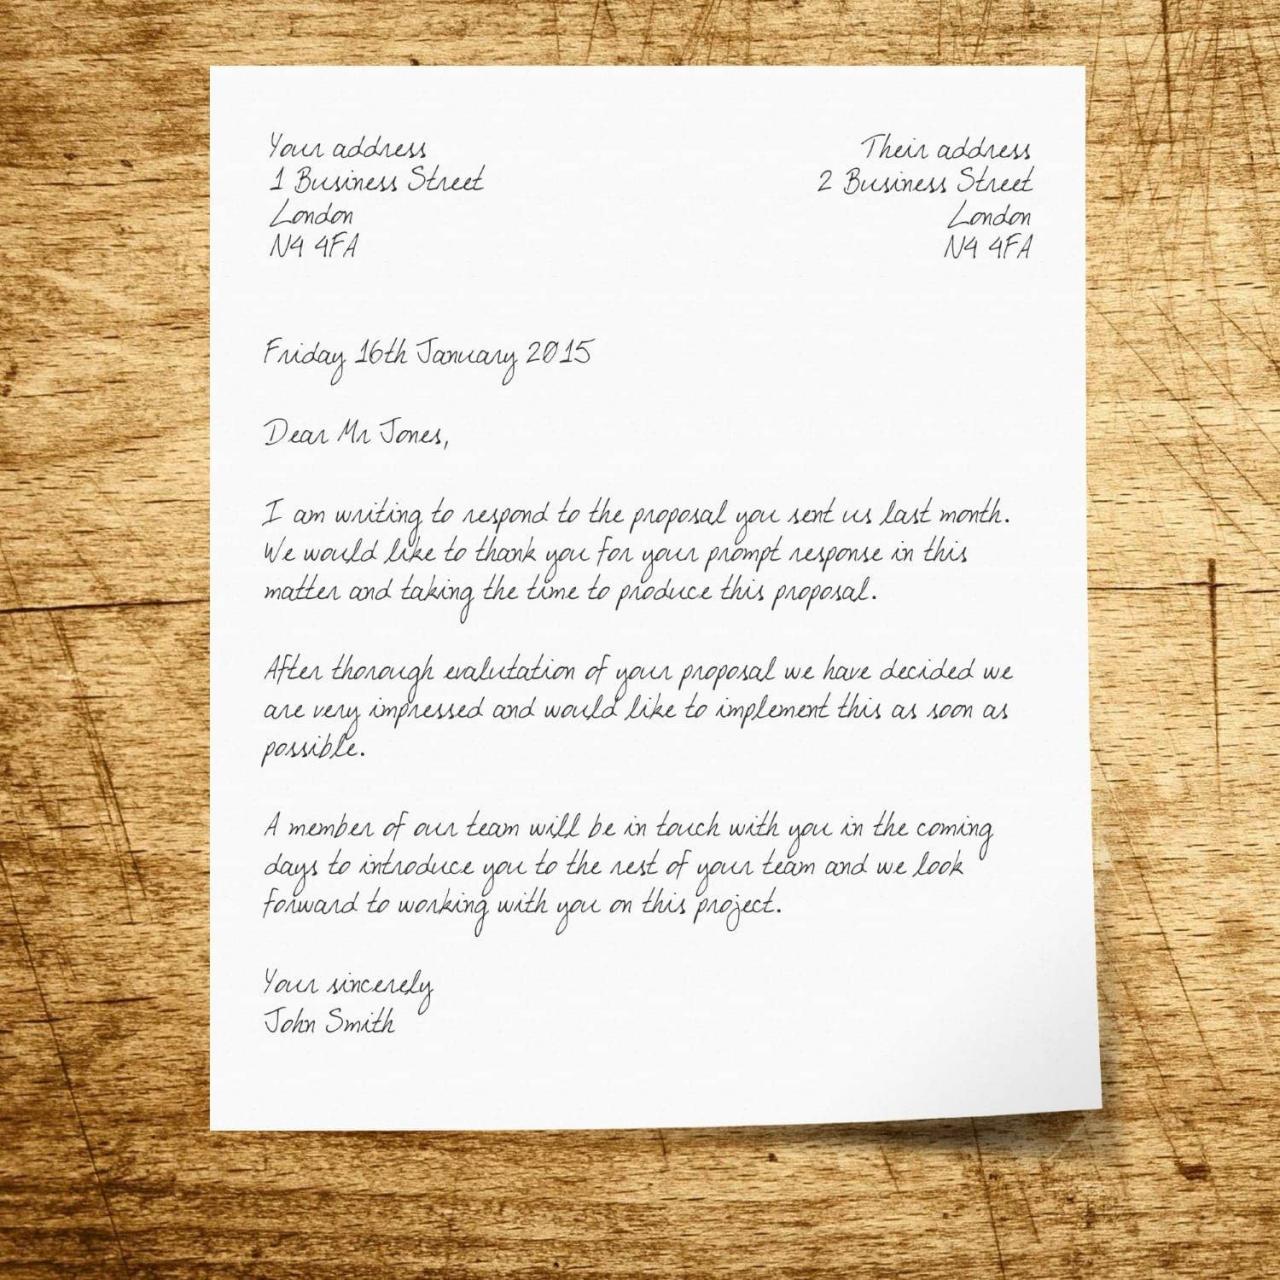 An example of a business letter